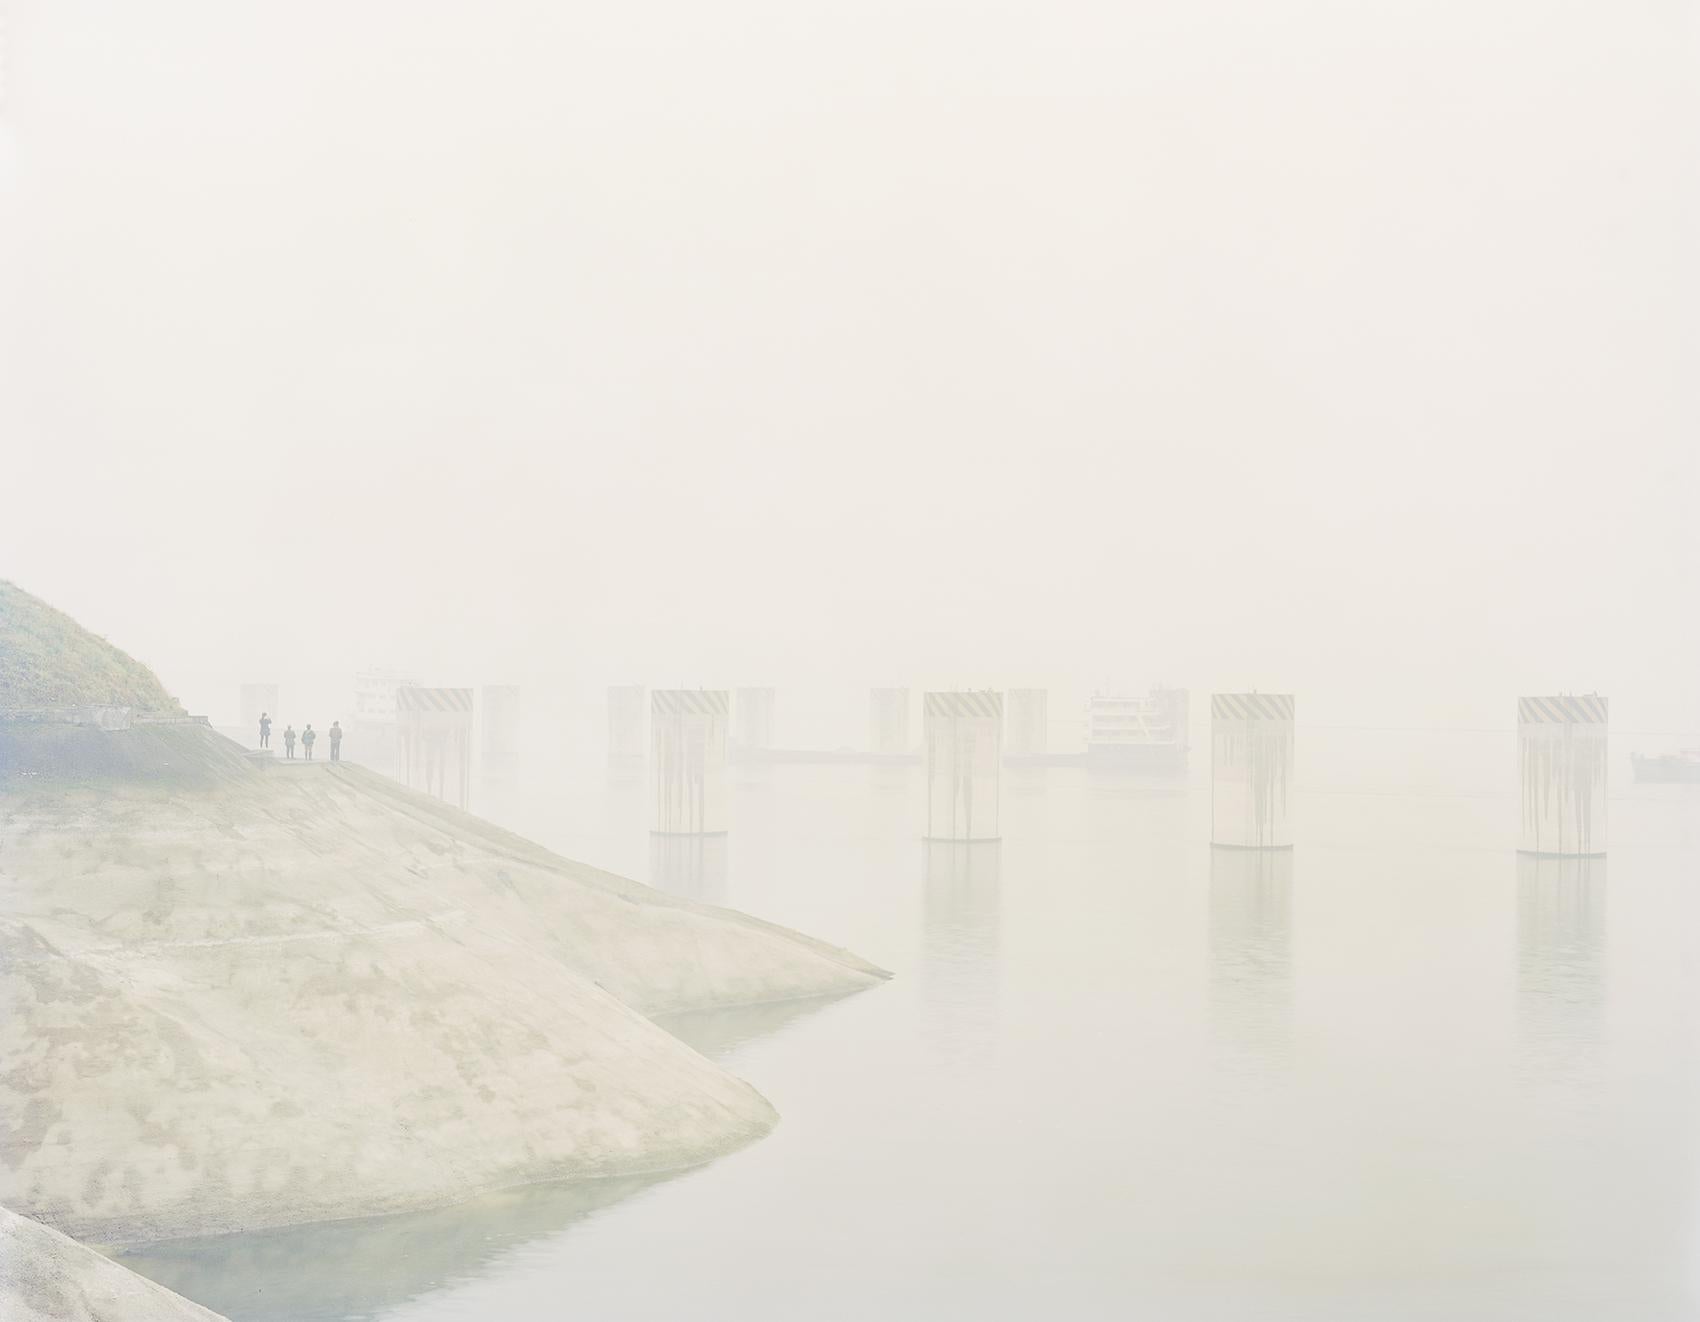 Three Gorges Dam, 2014 - Zhang Kechun (Landscape Colour Photography)
Signed and numbered on reverse
Archival pigment print

Available in three sizes:
35 1/2 x 43 inches, edition of 7 + 1 AP
42 1/2 x 52 3/4 inches, edition of 5 + 1 AP
53 x 65 3/4